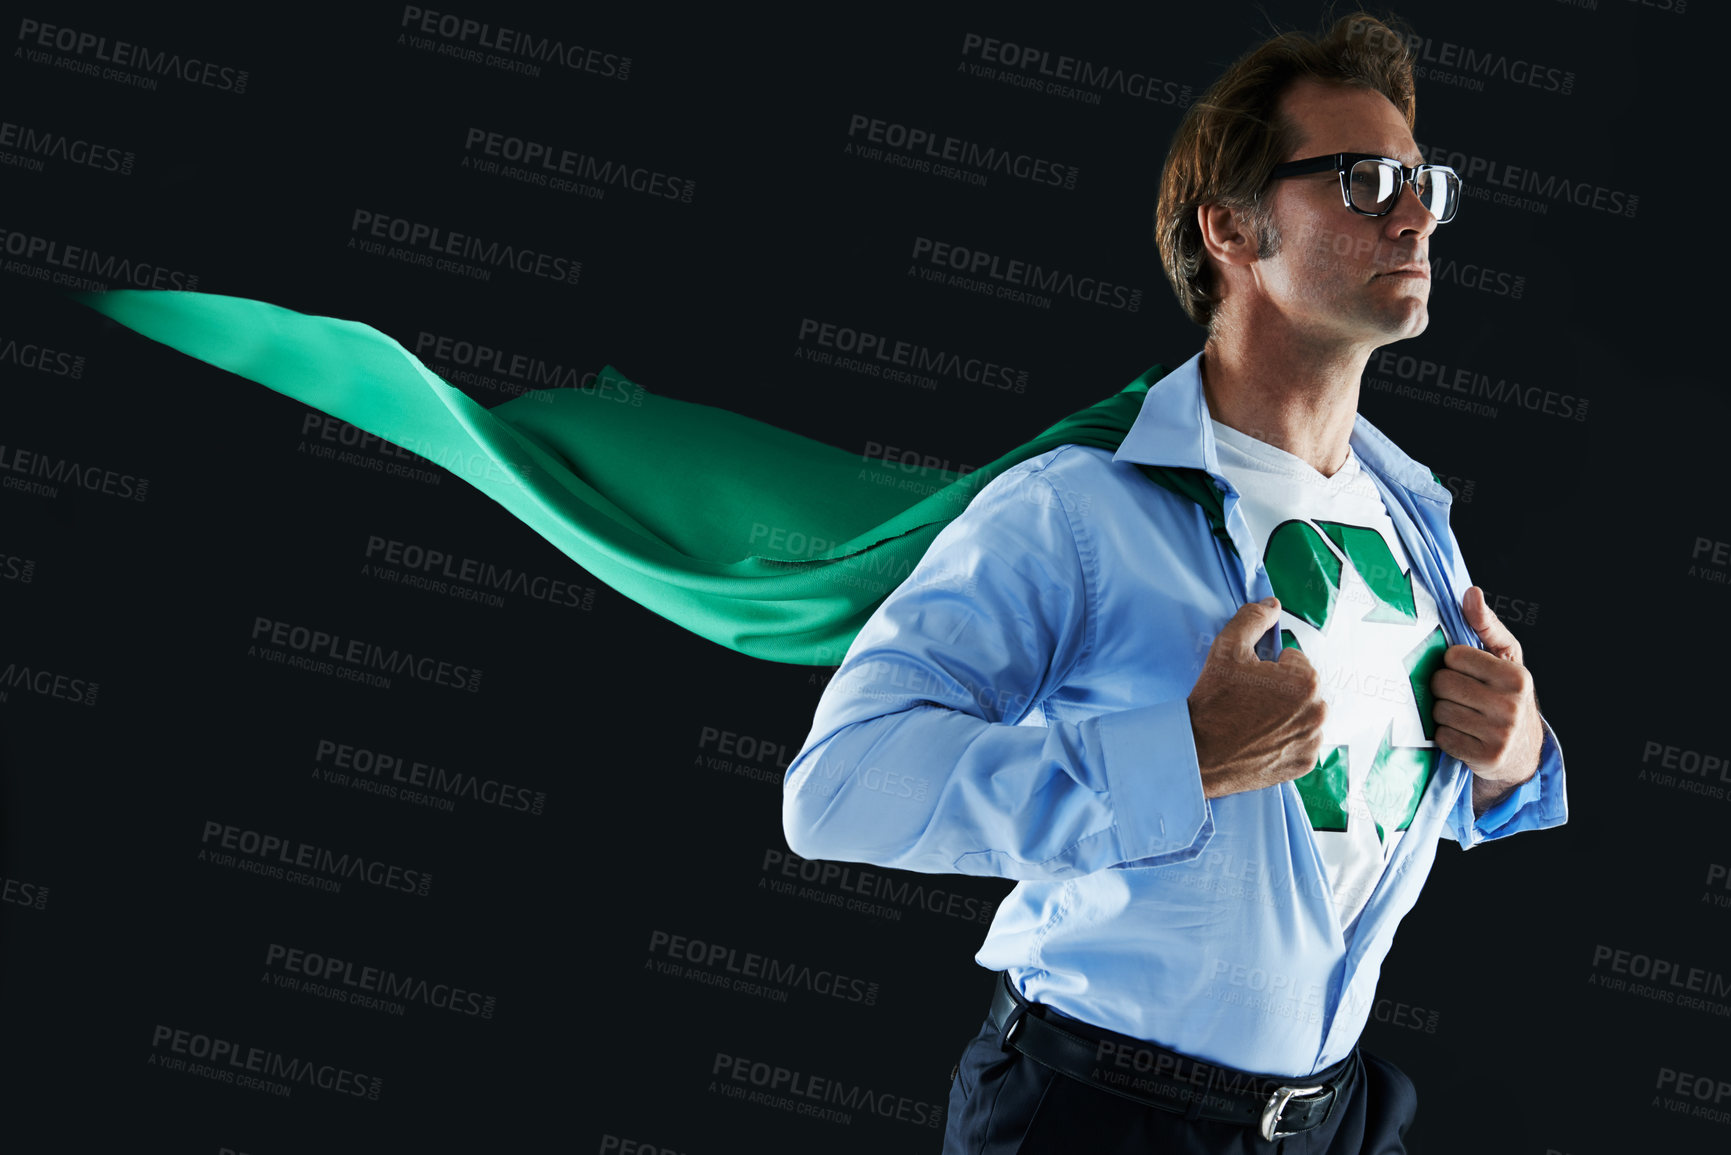 Buy stock photo Cropped shot of a superhero changing into his costume